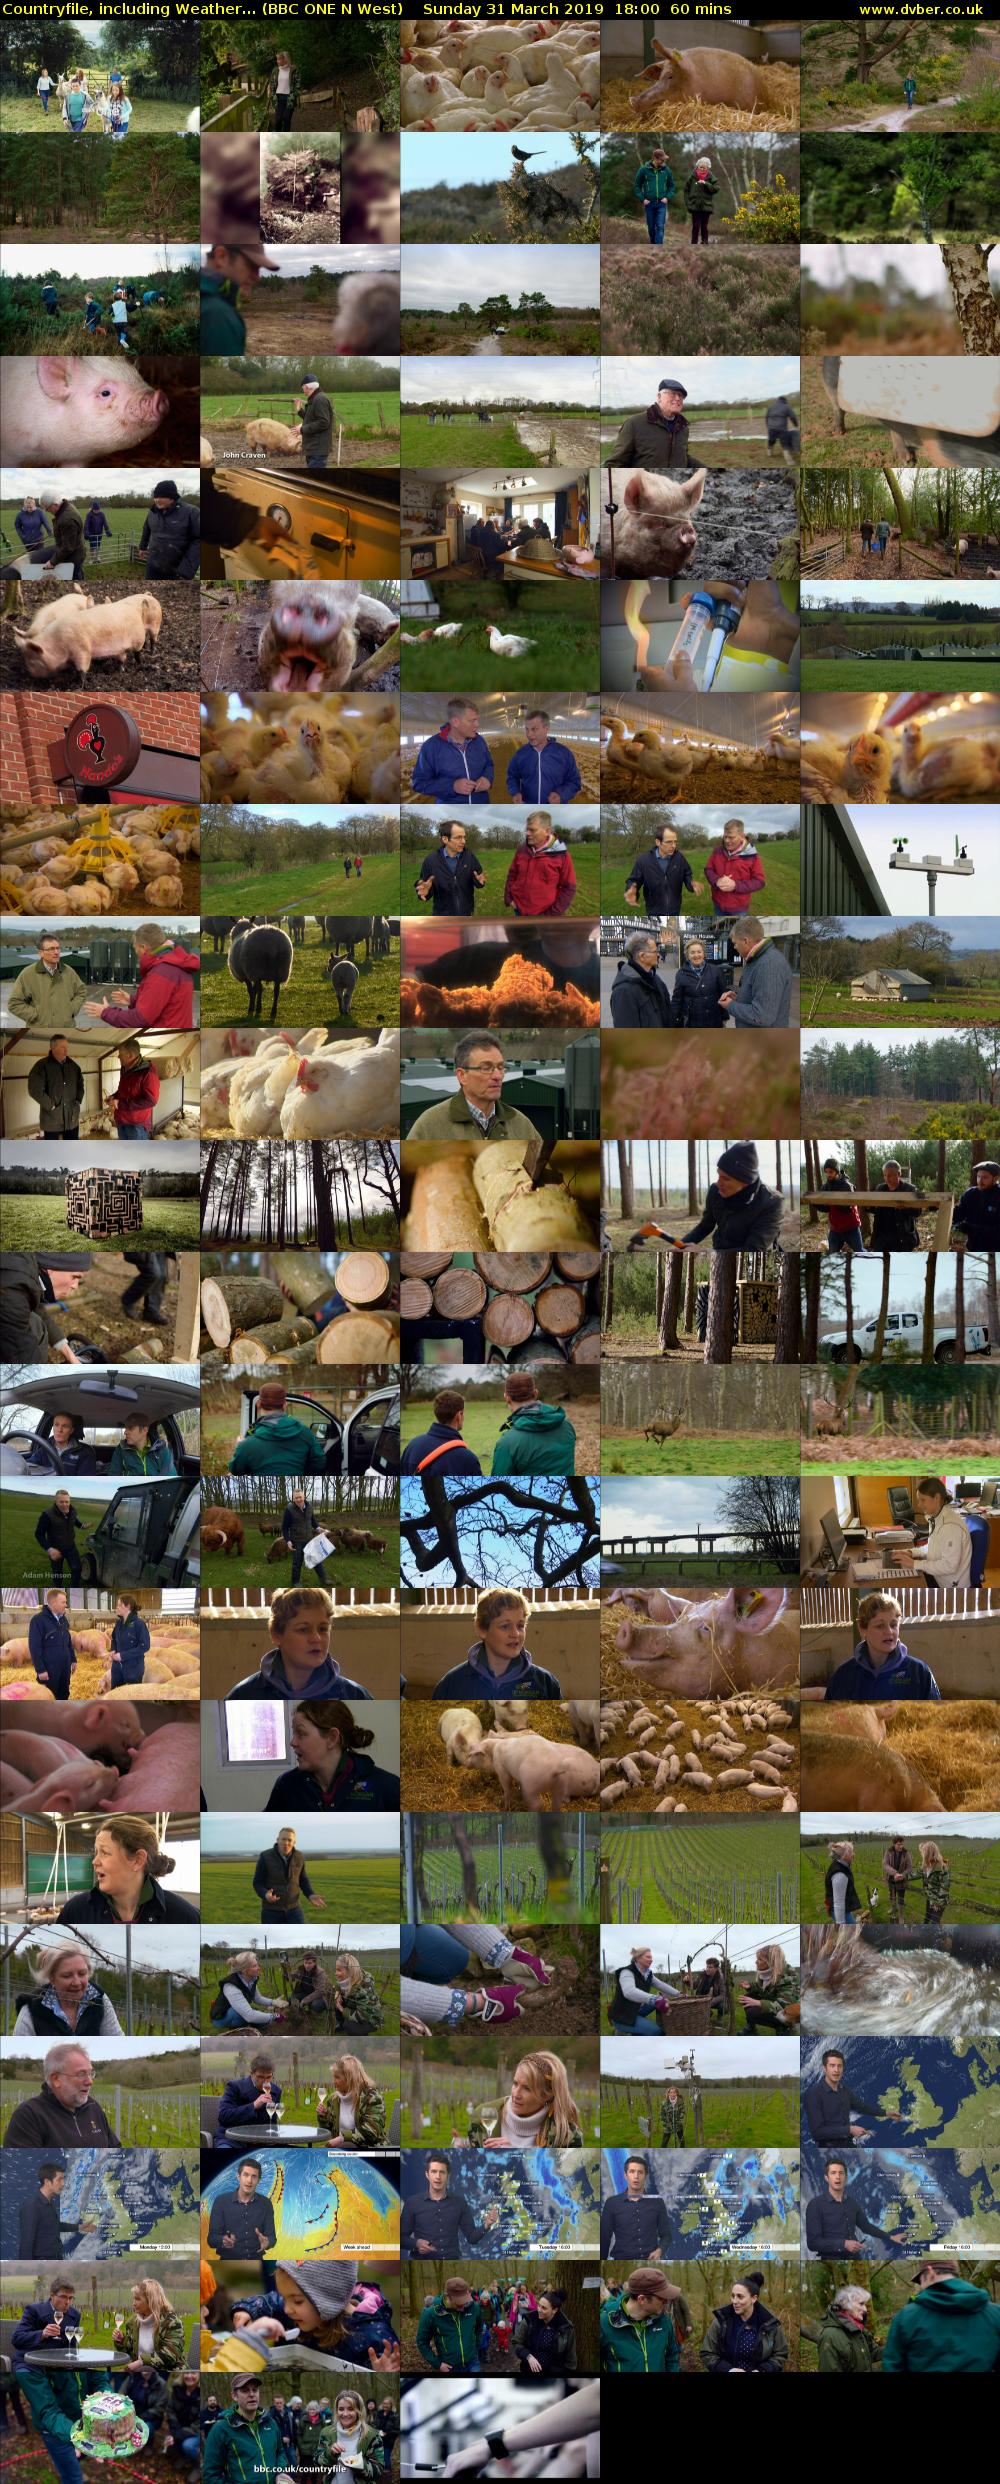 Countryfile, including Weather... (BBC ONE N West) Sunday 31 March 2019 18:00 - 19:00